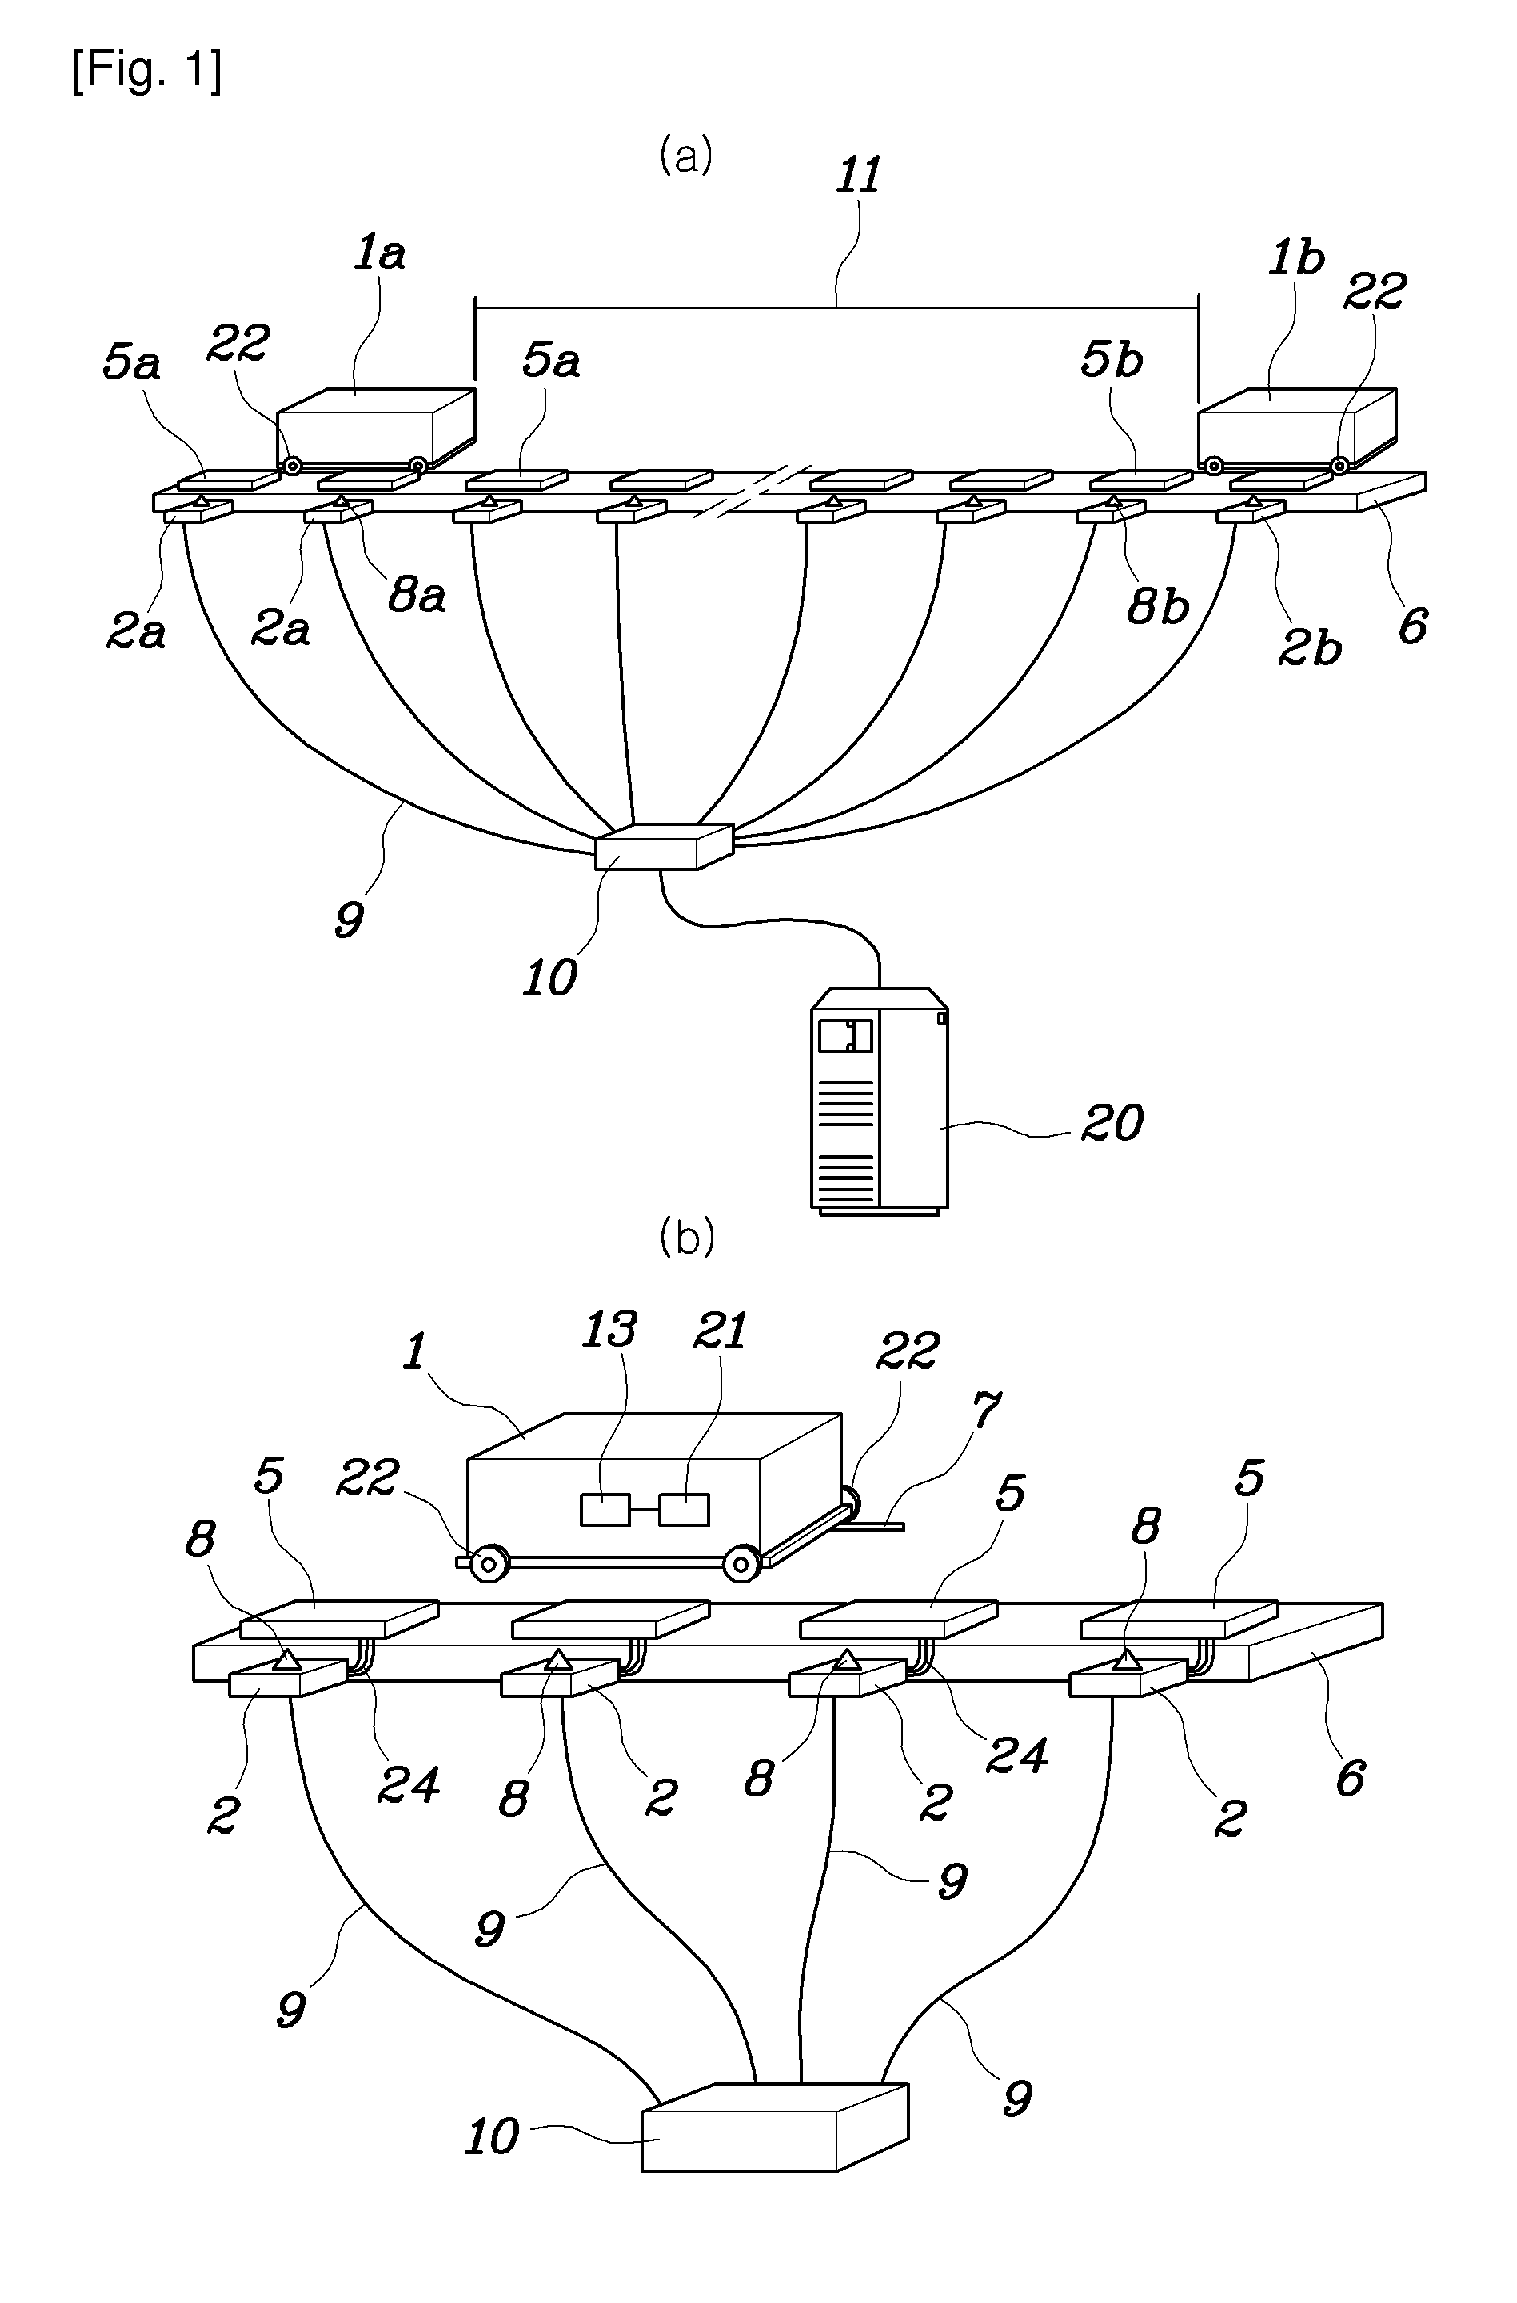 Method and system for merge control in an automated vehicle system